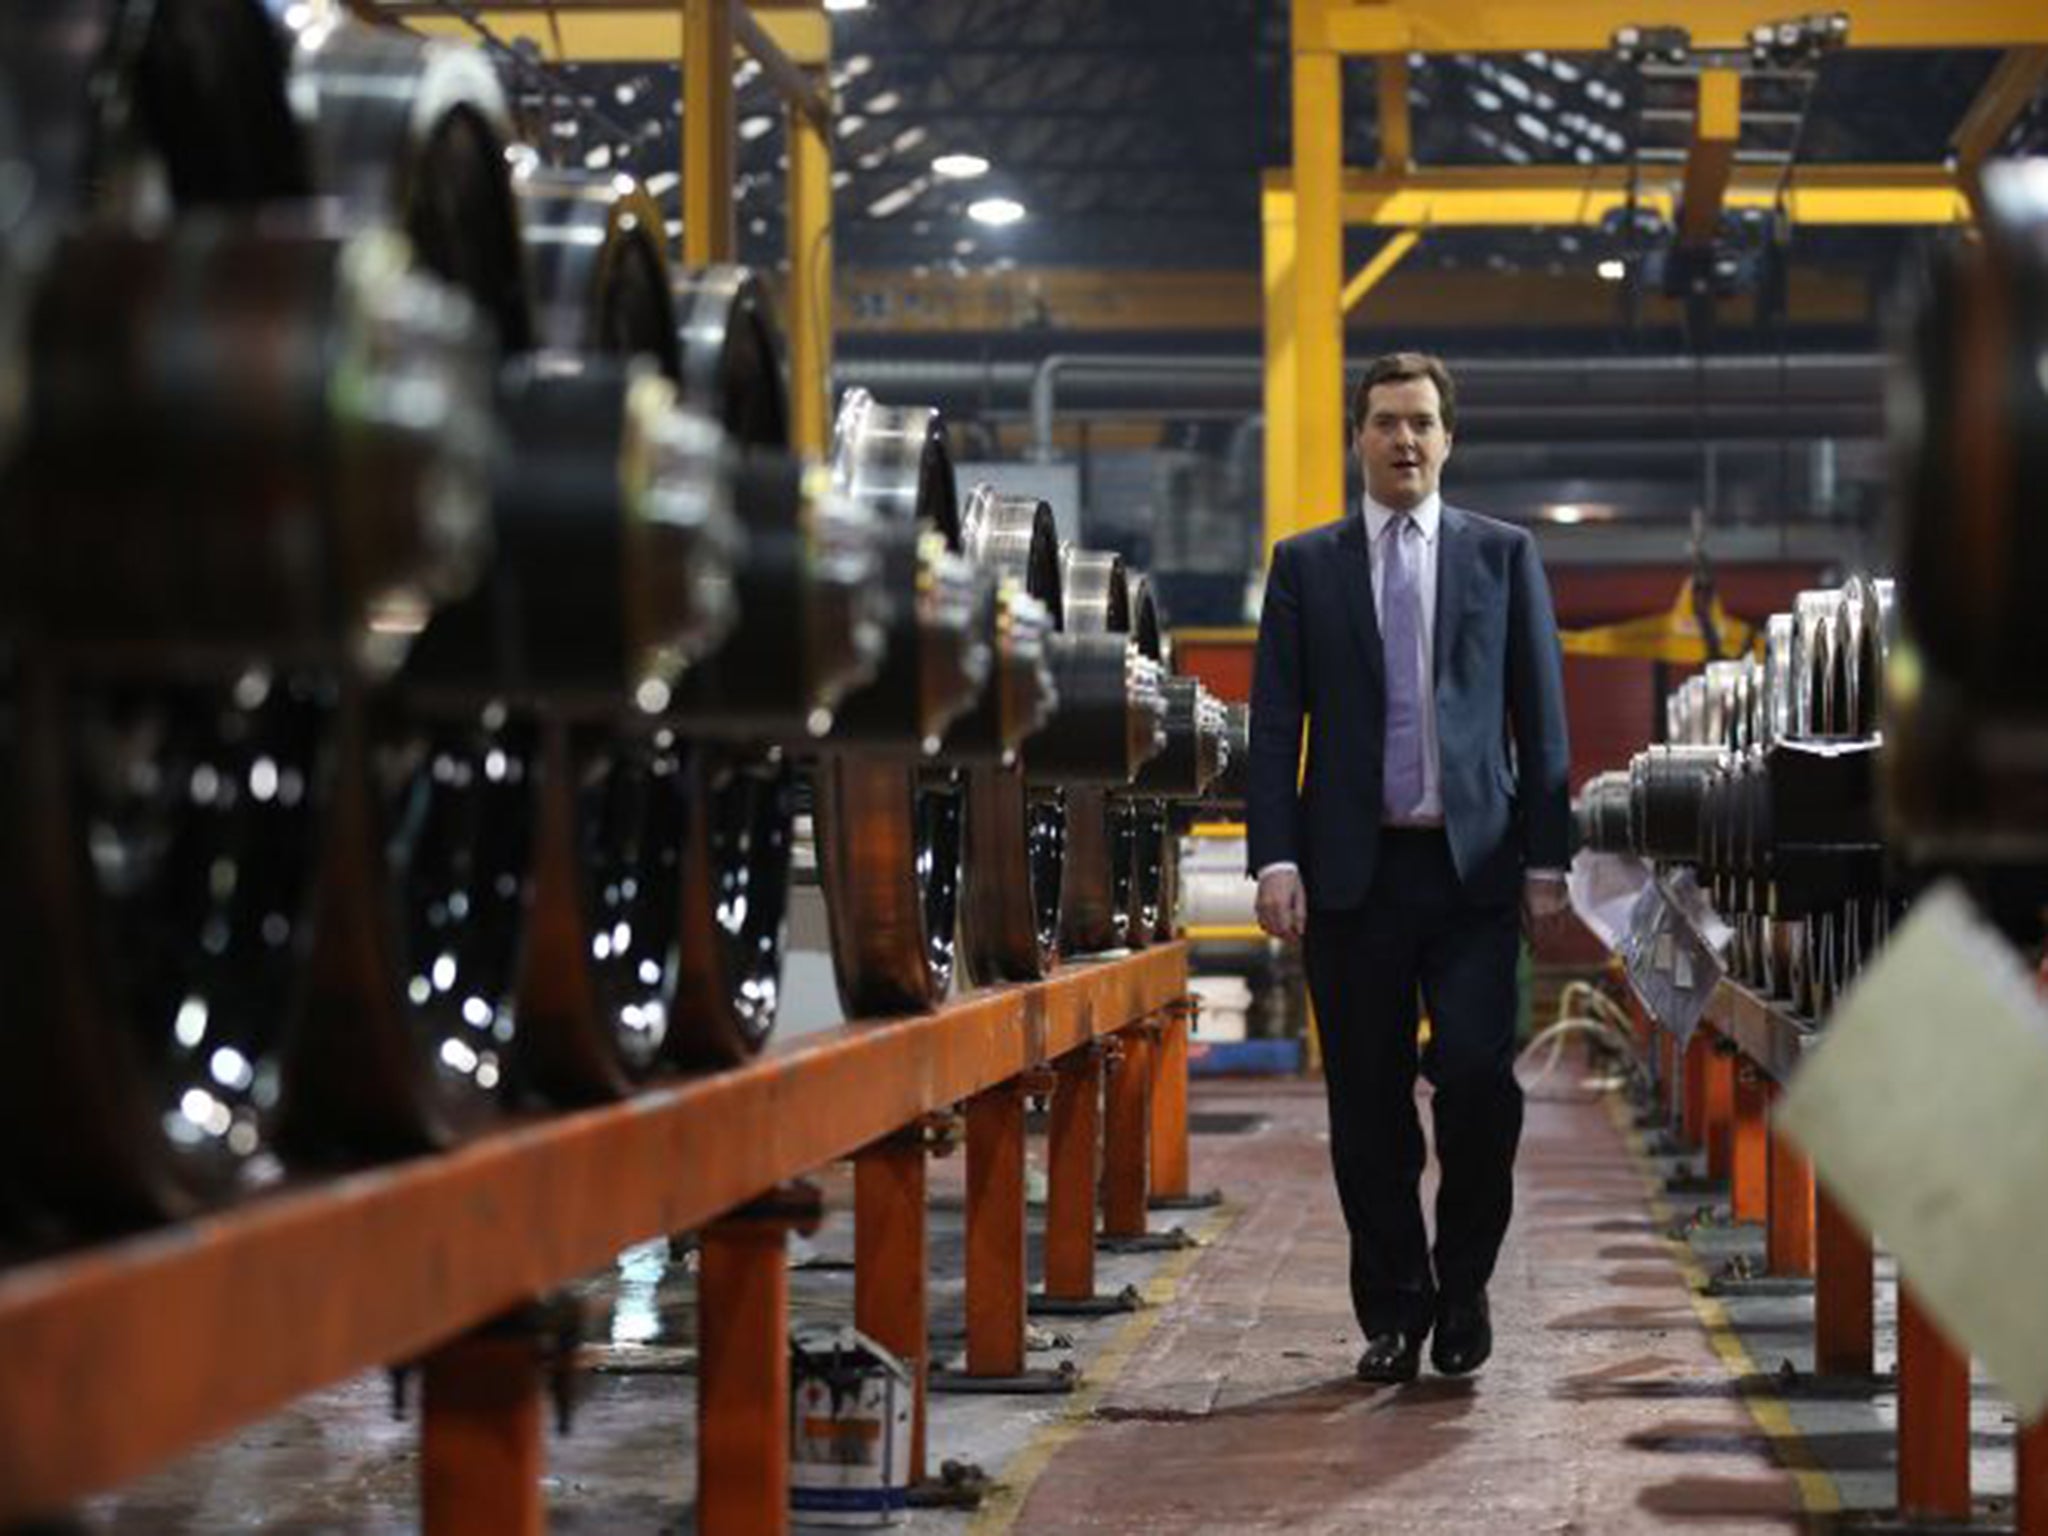 Chancellor George Osborne takes part in a tour of the train wheel manufacturers Lucchini UK, in Manchester, in 2013. The first phase of HS2 opens in 2026